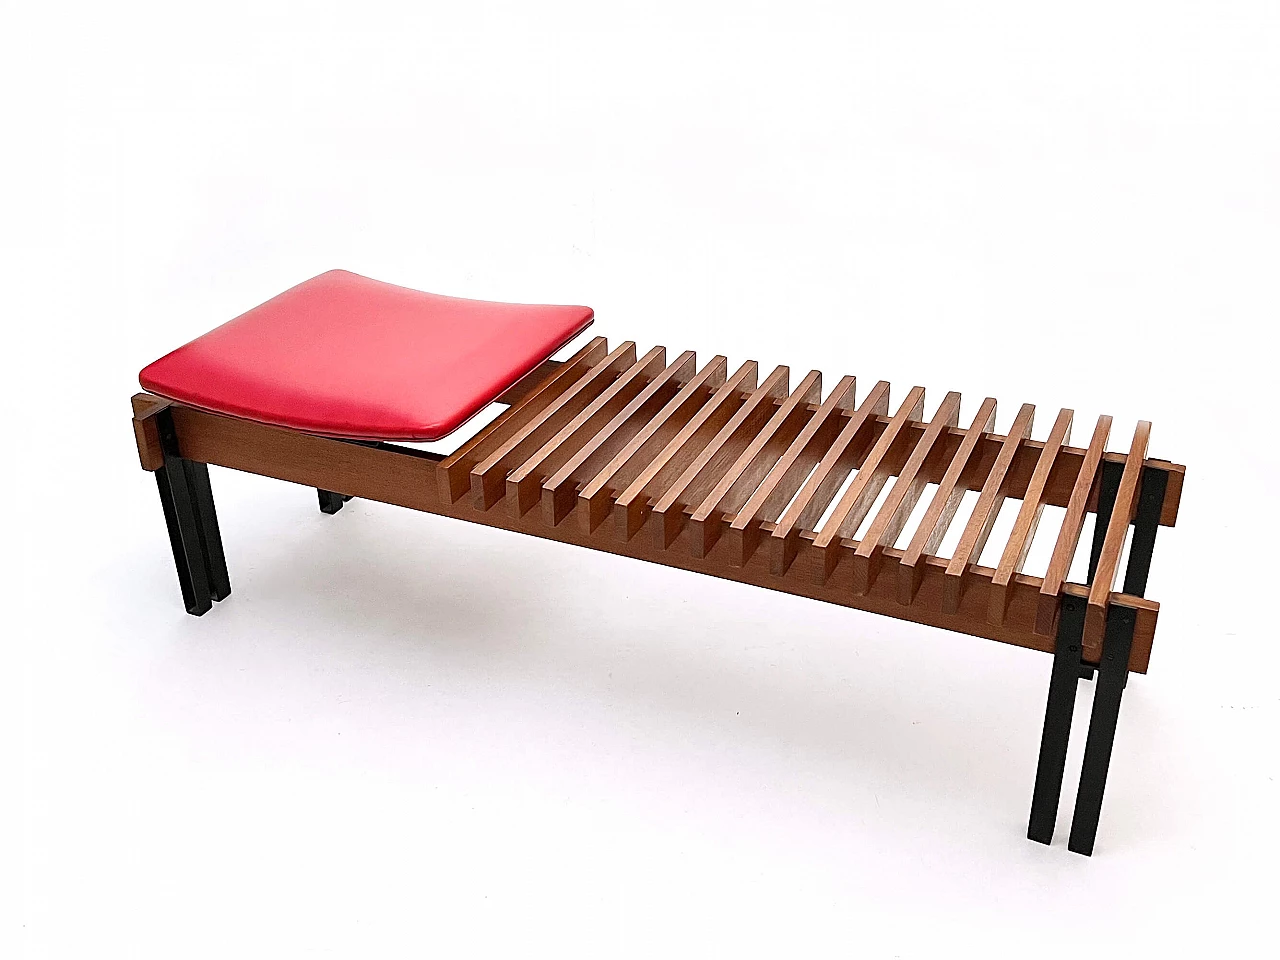 Teak and steel bench with skai seat by Inge and Luciano Rubino for APEC, 1960s 1